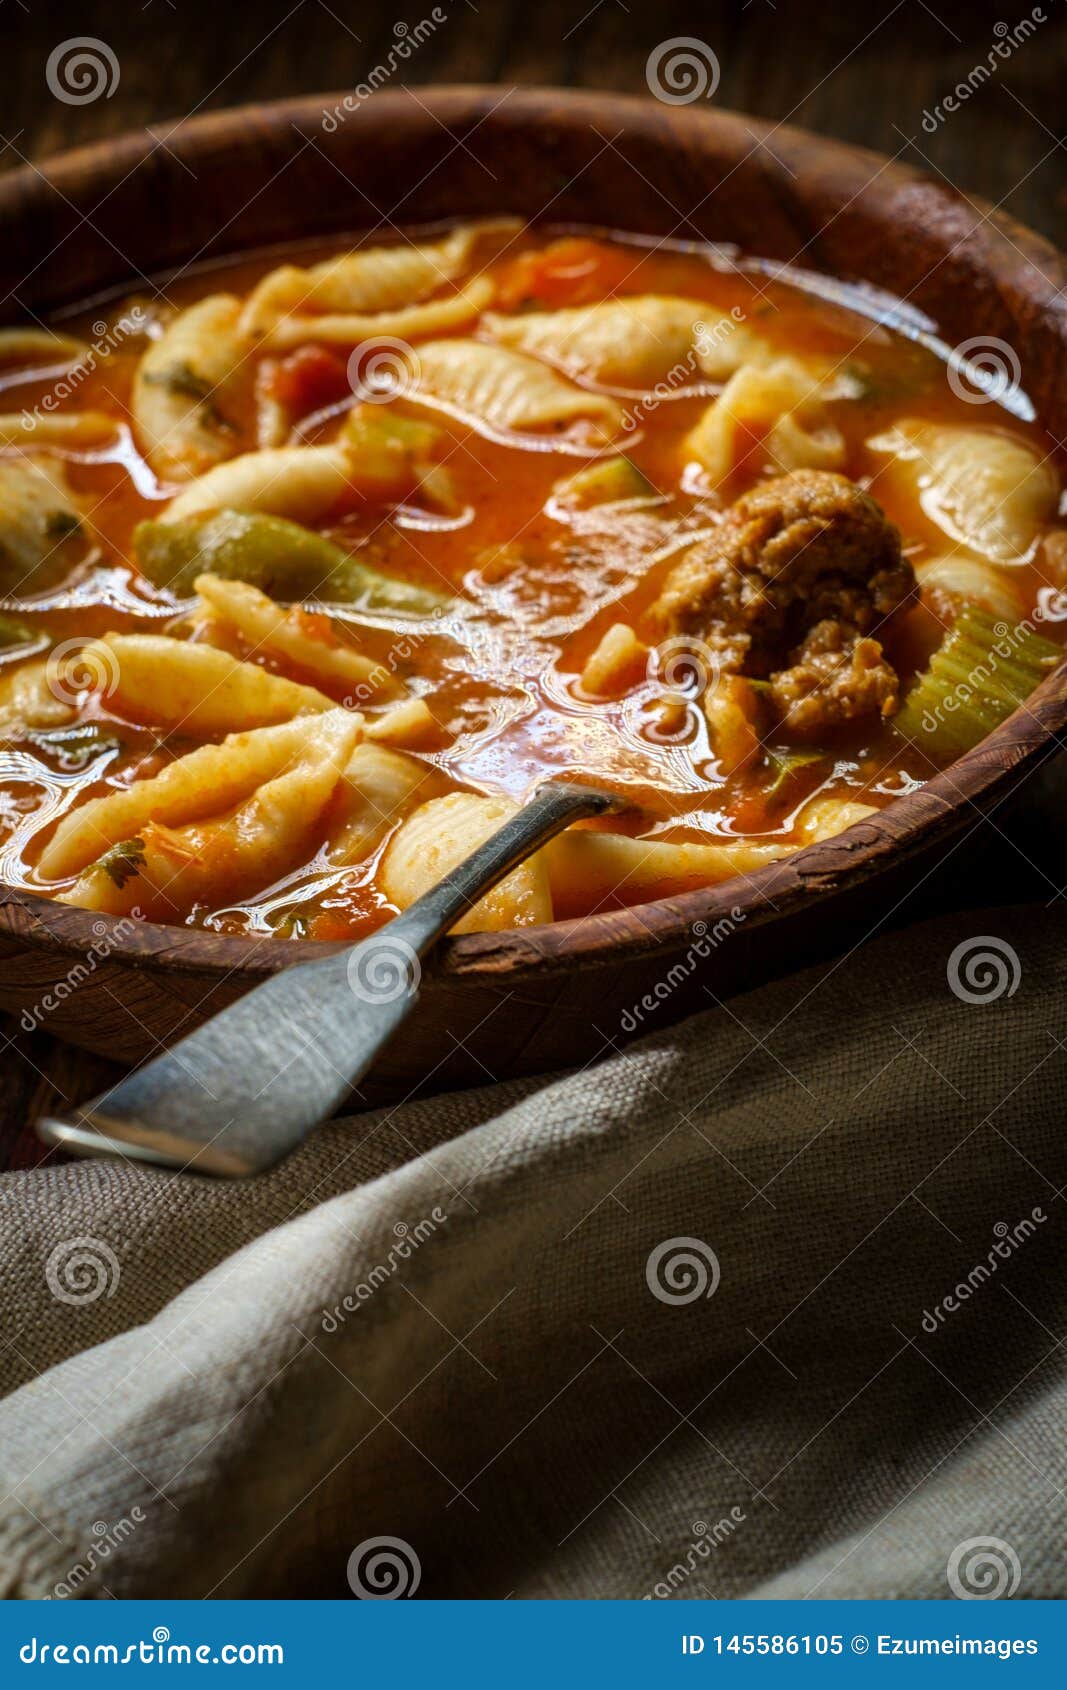 Italian Sausage Minestrone Soup Stock Image - Image of moody, delicious ...